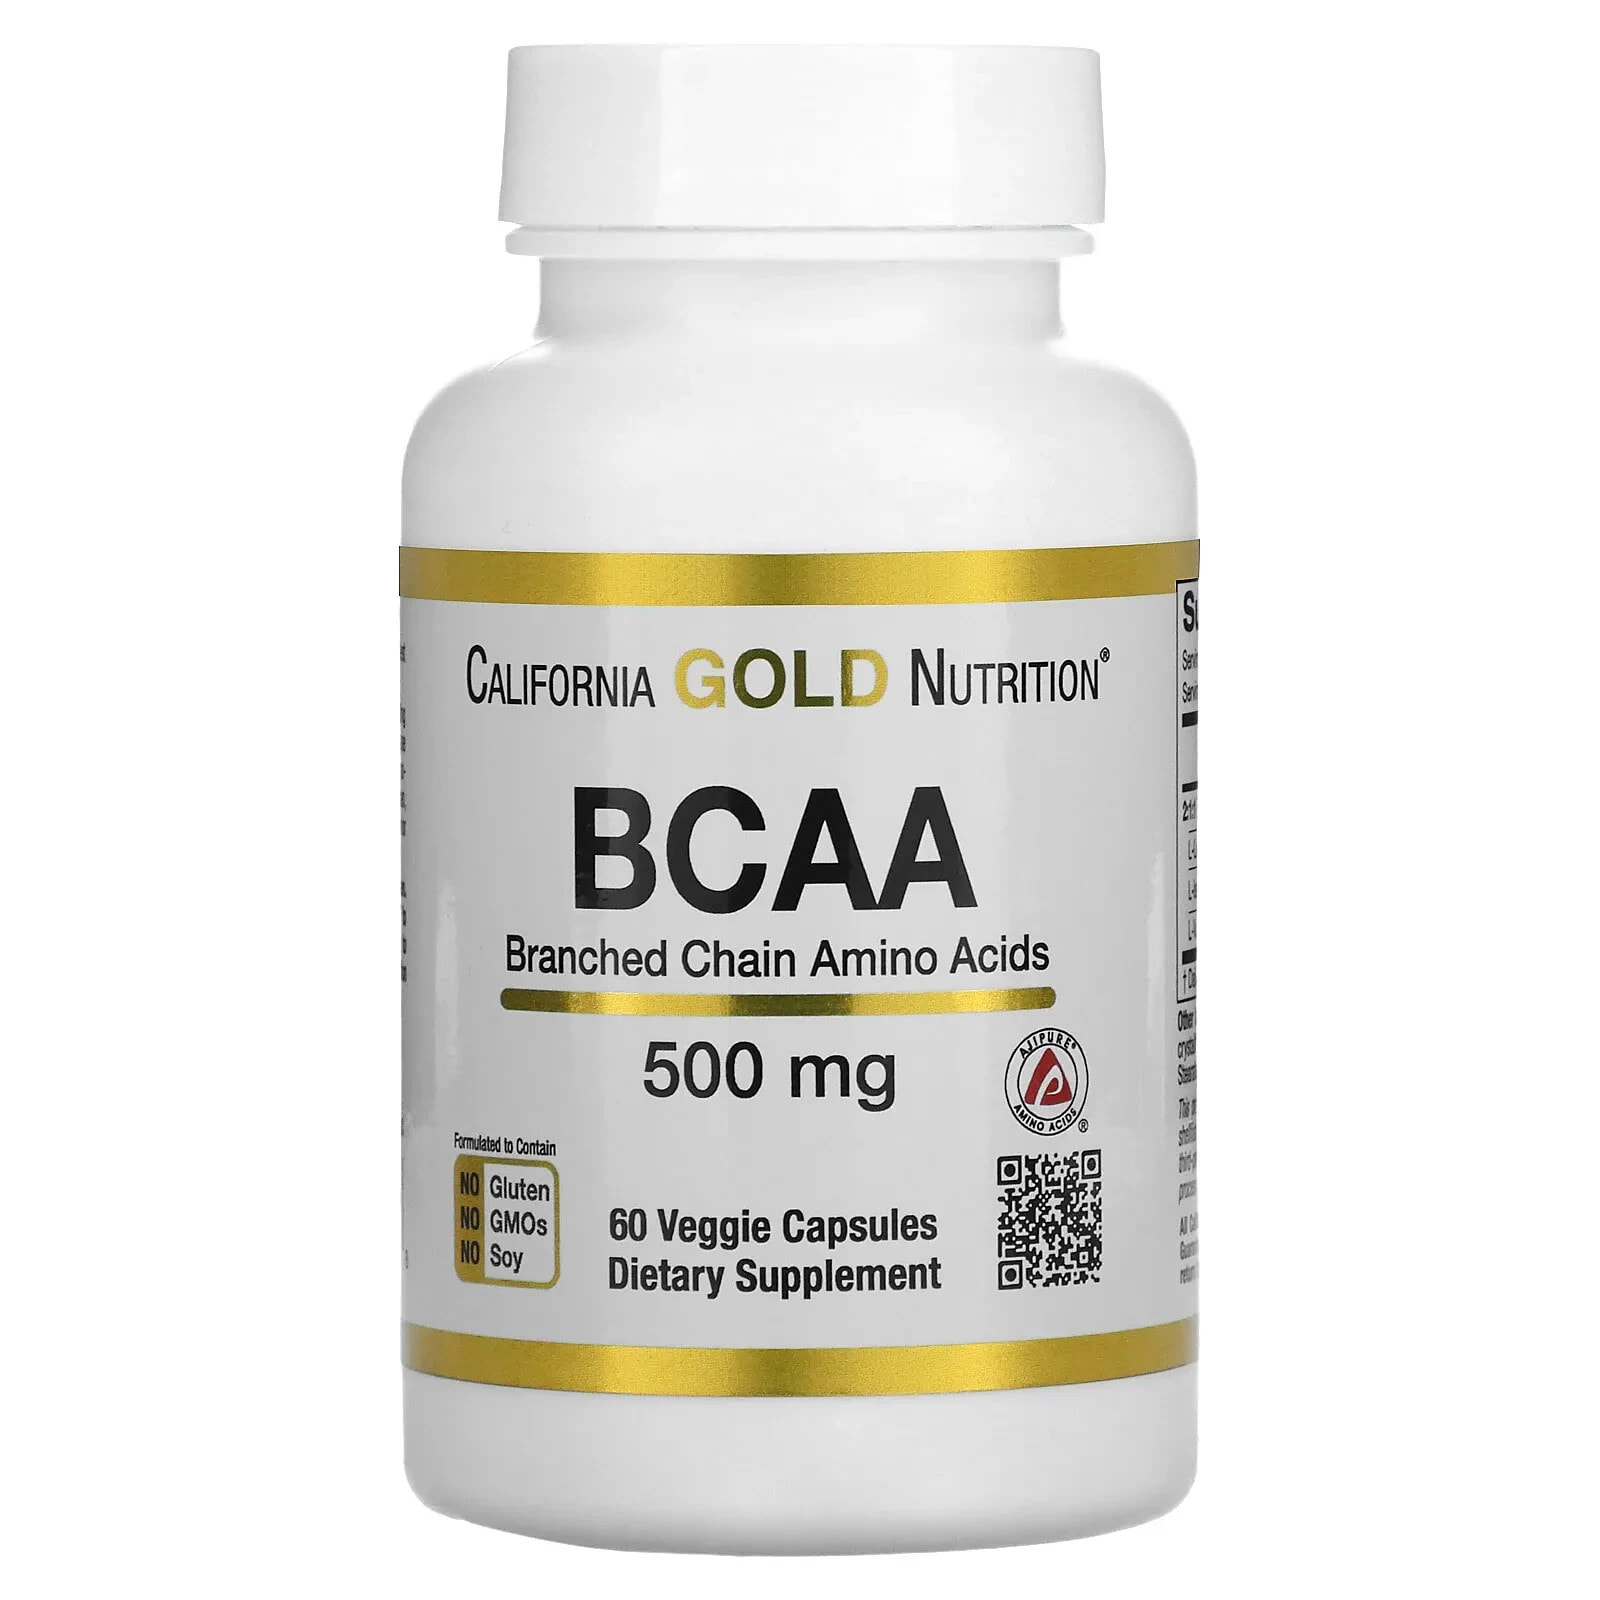 California Gold Nutrition, BCAA, AjiPure® Branched Chain Amino Acids, 500 mg, 60 Veggie Caps